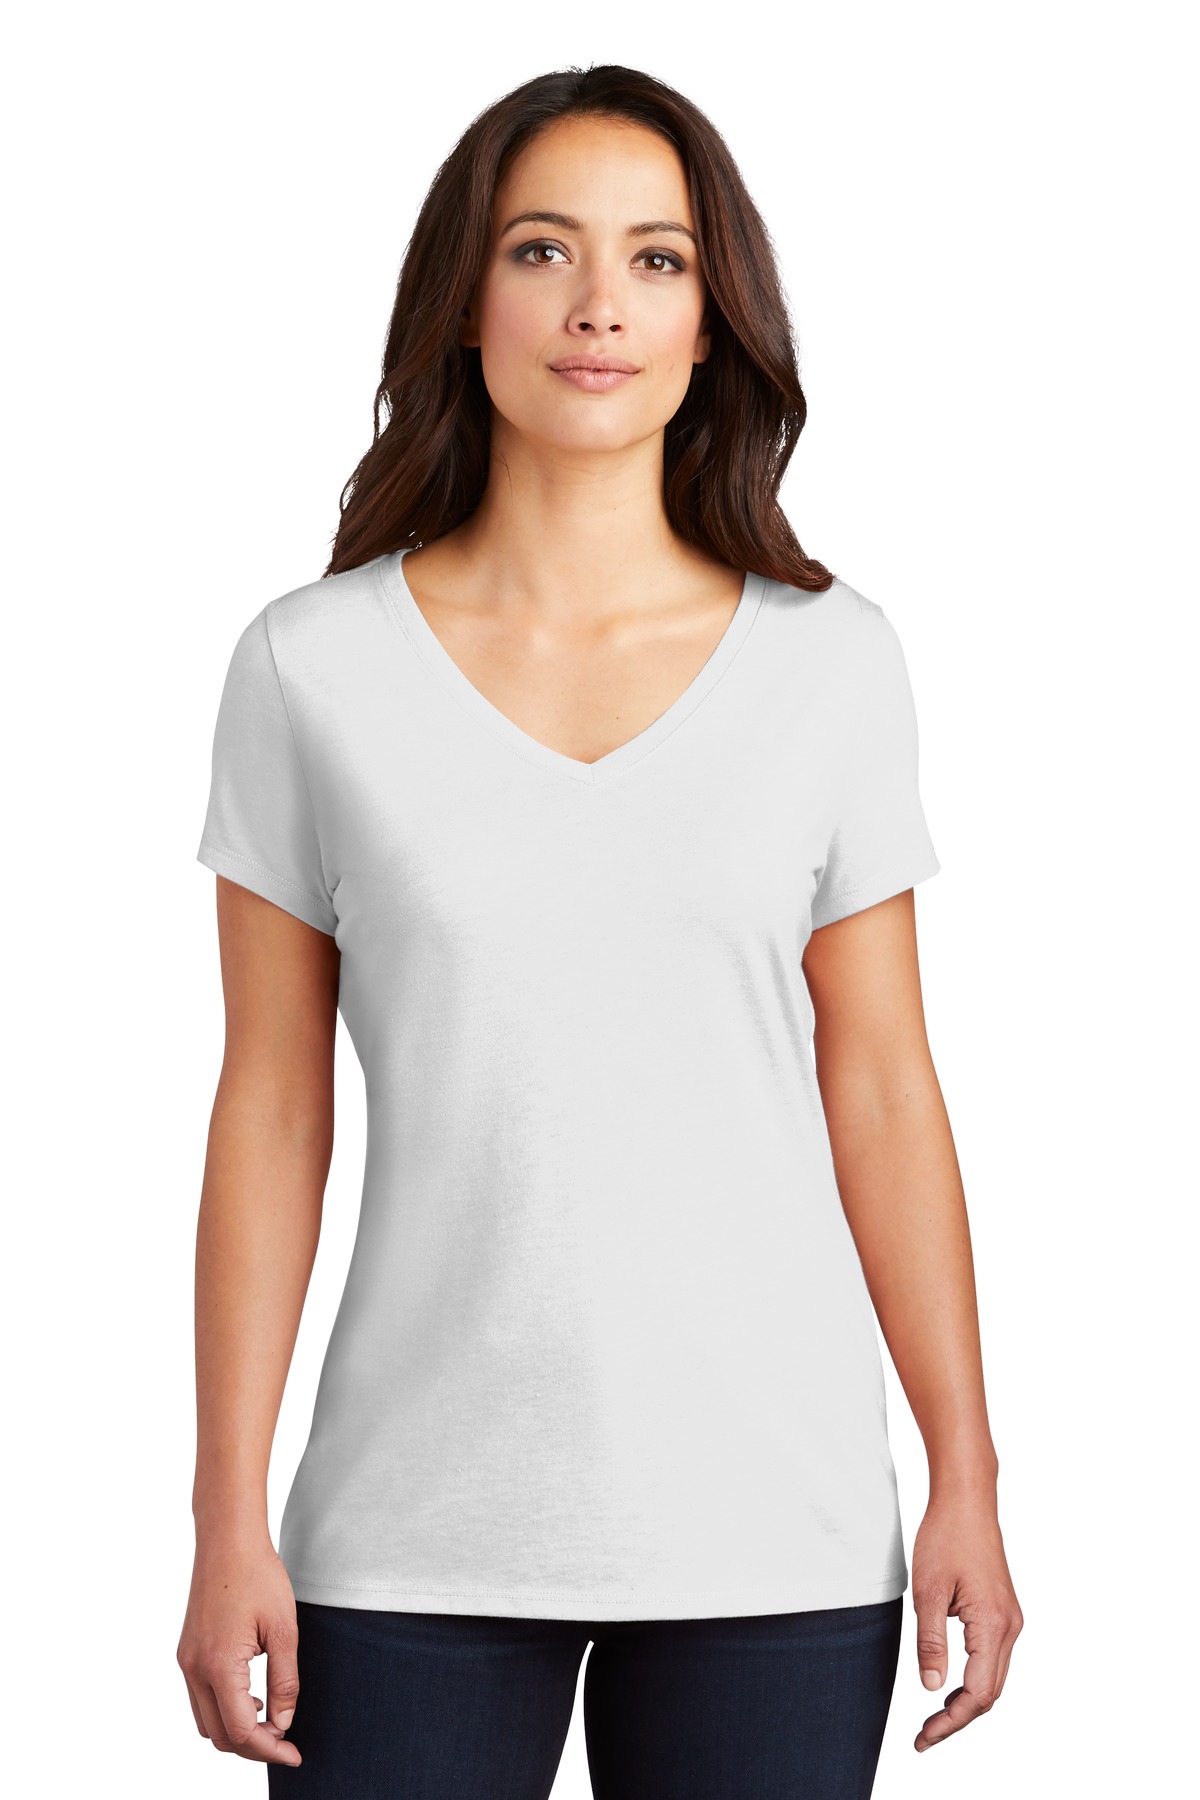 District Ladies Hospitality T-Shirts ® Womens Perfect Tri® V-Neck Tee.-District